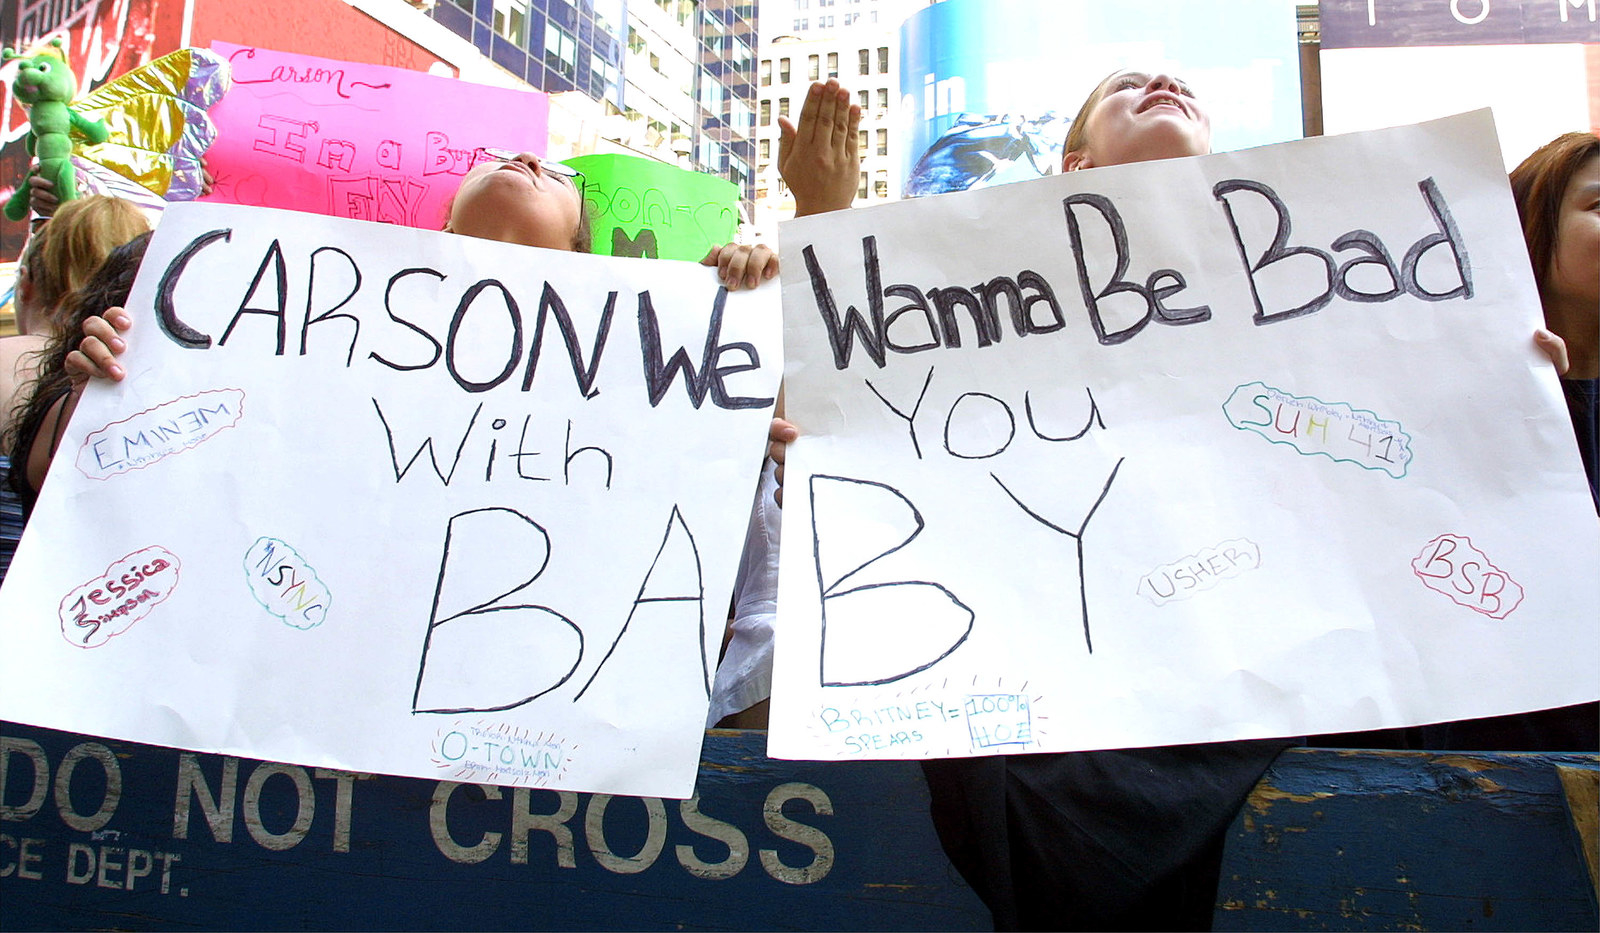 &quot;carson we wanna be bad with you baby&quot; sign